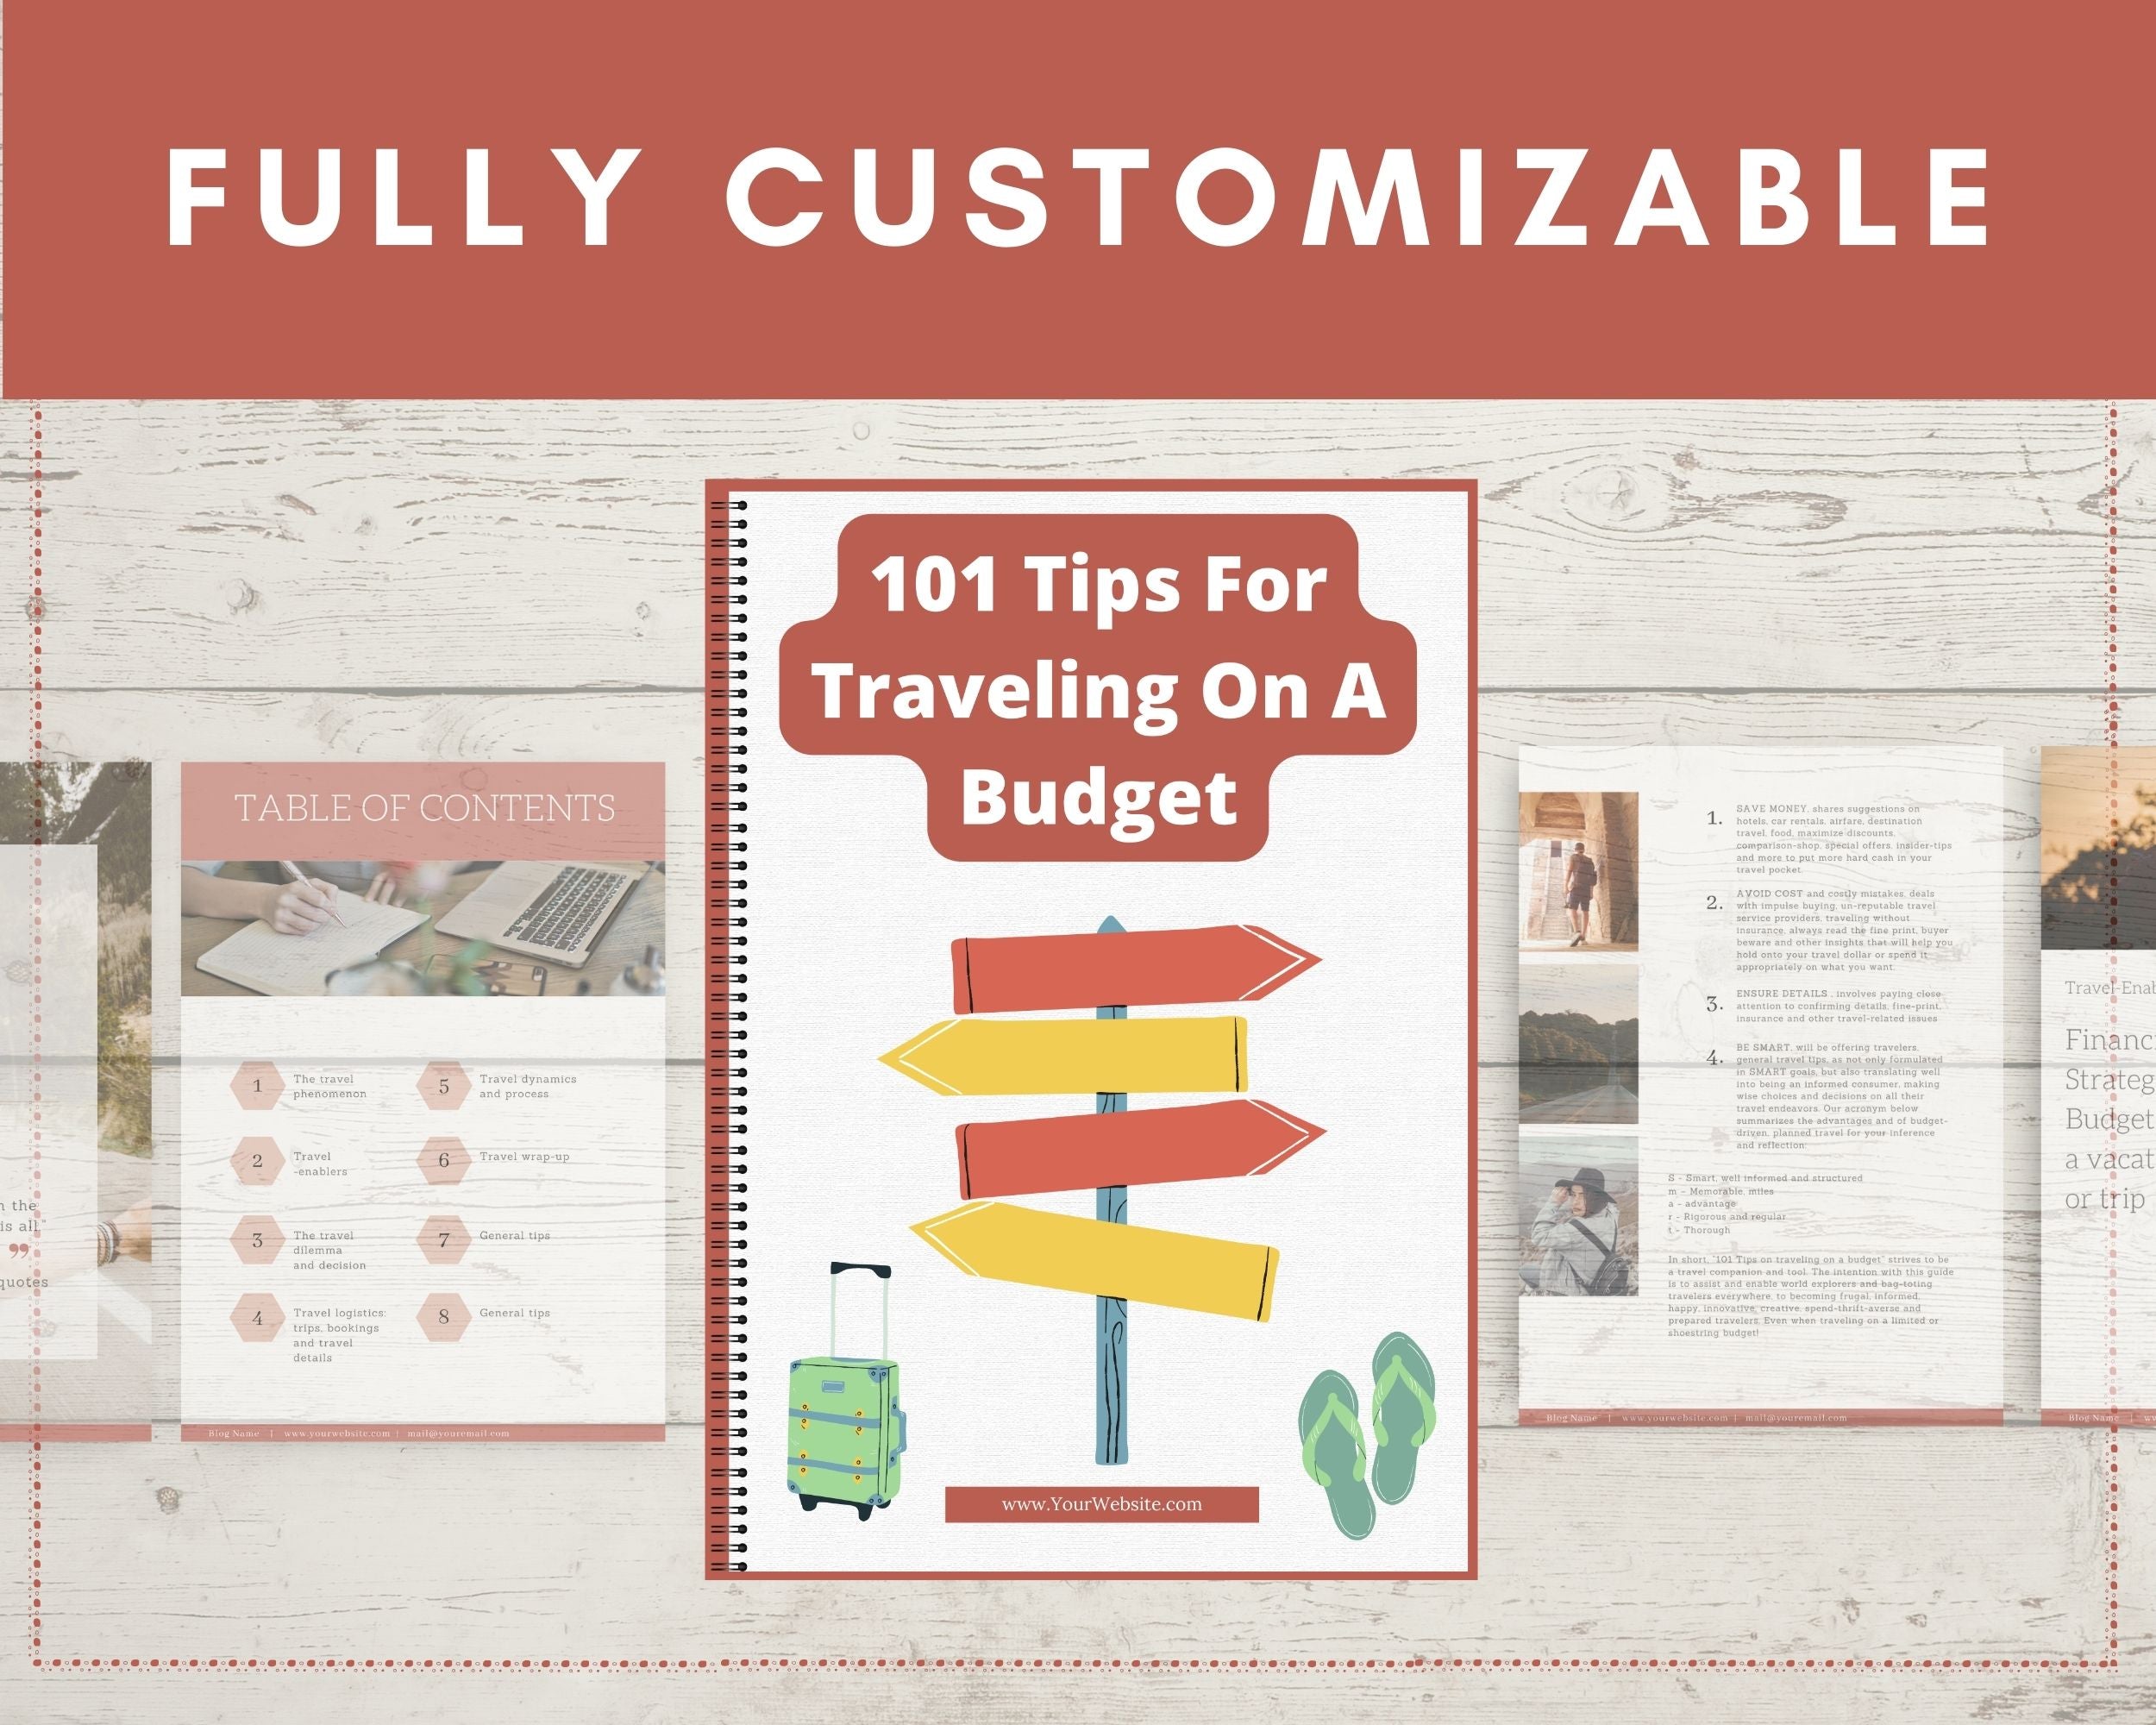 Editable 101 Tips For Traveling On A Budget Ebook in Canva | Rebrandable and Resizable Canva Template